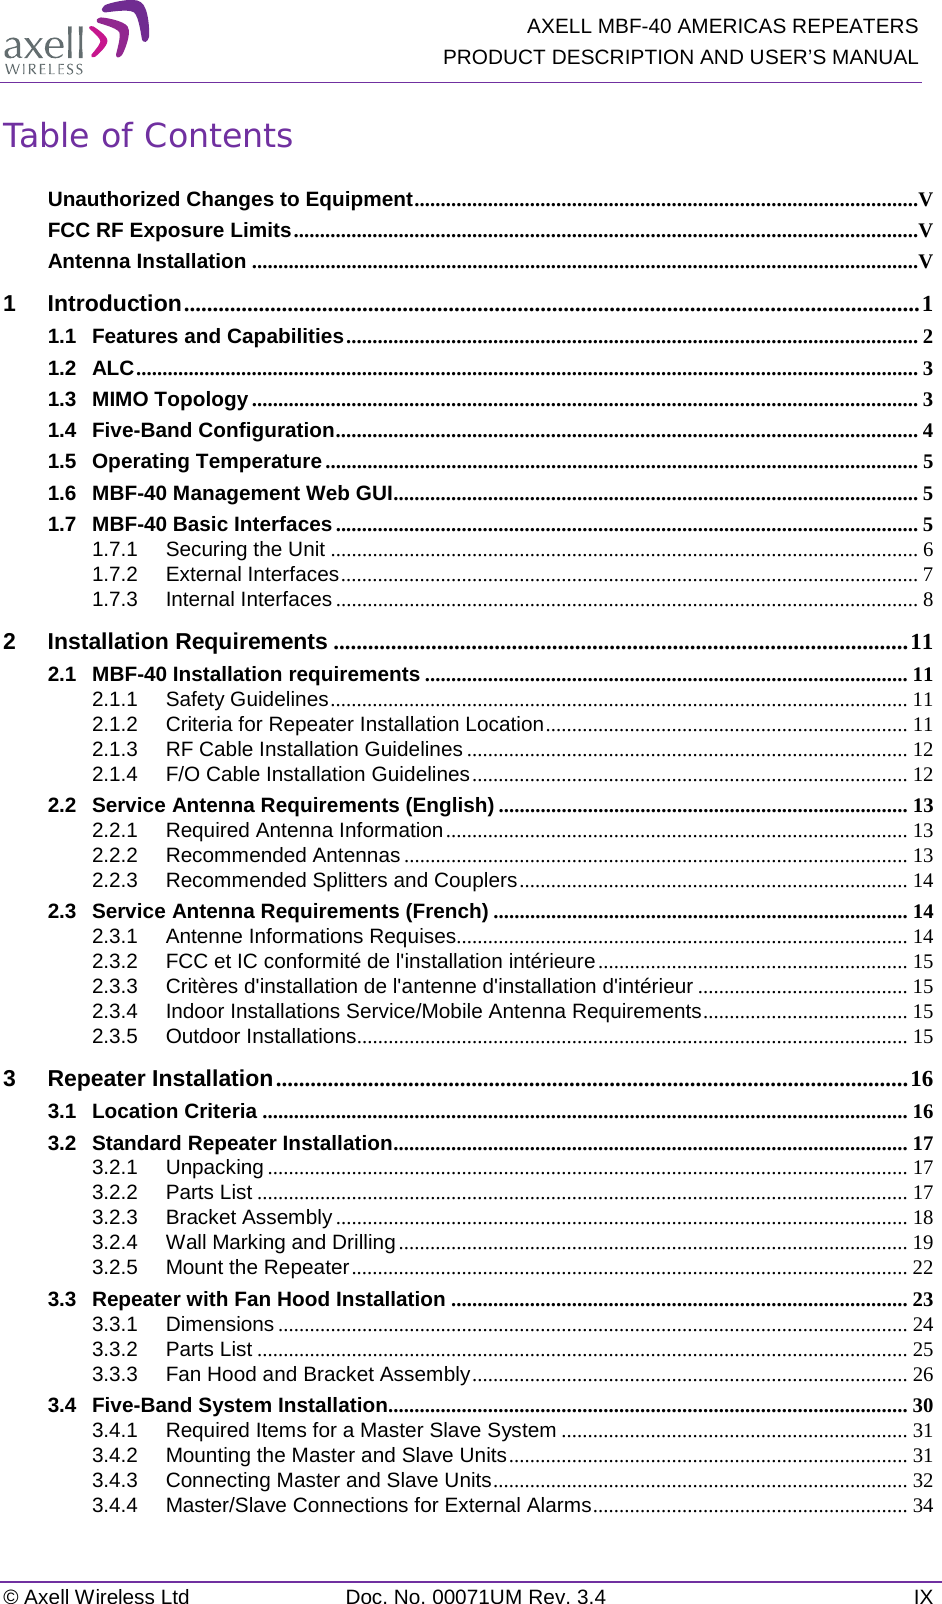  AXELL MBF-40 AMERICAS REPEATERS PRODUCT DESCRIPTION AND USER’S MANUAL © Axell Wireless Ltd Doc. No. 00071UM Rev. 3.4 IX Table of Contents Unauthorized Changes to Equipment ................................................................................................V FCC RF Exposure Limits .......................................................................................................................V Antenna Installation ...............................................................................................................................V 1 Introduction ................................................................................................................................ 1 1.1 Features and Capabilities ............................................................................................................. 2 1.2 ALC ..................................................................................................................................................... 3 1.3 MIMO Topology ............................................................................................................................... 3 1.4 Five-Band Configuration ............................................................................................................... 4 1.5 Operating Temperature ................................................................................................................. 5 1.6 MBF-40 Management Web GUI .................................................................................................... 5 1.7 MBF-40 Basic Interfaces ............................................................................................................... 5 1.7.1 Securing the Unit ................................................................................................................ 6 1.7.2 External Interfaces .............................................................................................................. 7 1.7.3 Internal Interfaces ............................................................................................................... 8 2 Installation Requirements .................................................................................................... 11 2.1 MBF-40 Installation requirements ............................................................................................ 11 2.1.1 Safety Guidelines .............................................................................................................. 11 2.1.2 Criteria for Repeater Installation Location ..................................................................... 11 2.1.3 RF Cable Installation Guidelines .................................................................................... 12 2.1.4 F/O Cable Installation Guidelines ................................................................................... 12 2.2 Service Antenna Requirements (English) .............................................................................. 13 2.2.1 Required Antenna Information ........................................................................................ 13 2.2.2 Recommended Antennas ................................................................................................ 13 2.2.3 Recommended Splitters and Couplers .......................................................................... 14 2.3 Service Antenna Requirements (French) ............................................................................... 14 2.3.1 Antenne Informations Requises...................................................................................... 14 2.3.2 FCC et IC conformité de l&apos;installation intérieure ........................................................... 15 2.3.3 Critères d&apos;installation de l&apos;antenne d&apos;installation d&apos;intérieur ........................................ 15 2.3.4 Indoor Installations Service/Mobile Antenna Requirements ....................................... 15 2.3.5 Outdoor Installations......................................................................................................... 15 3 Repeater Installation .............................................................................................................. 16 3.1 Location Criteria ........................................................................................................................... 16 3.2 Standard Repeater Installation .................................................................................................. 17 3.2.1 Unpacking .......................................................................................................................... 17 3.2.2 Parts List ............................................................................................................................ 17 3.2.3 Bracket Assembly ............................................................................................................. 18 3.2.4 Wall Marking and Drilling ................................................................................................. 19 3.2.5 Mount the Repeater .......................................................................................................... 22 3.3 Repeater with Fan Hood Installation ....................................................................................... 23 3.3.1 Dimensions ........................................................................................................................ 24 3.3.2 Parts List ............................................................................................................................ 25 3.3.3 Fan Hood and Bracket Assembly ................................................................................... 26 3.4 Five-Band System Installation................................................................................................... 30 3.4.1 Required Items for a Master Slave System .................................................................. 31 3.4.2 Mounting the Master and Slave Units ............................................................................ 31 3.4.3 Connecting Master and Slave Units ............................................................................... 32 3.4.4 Master/Slave Connections for External Alarms ............................................................ 34 